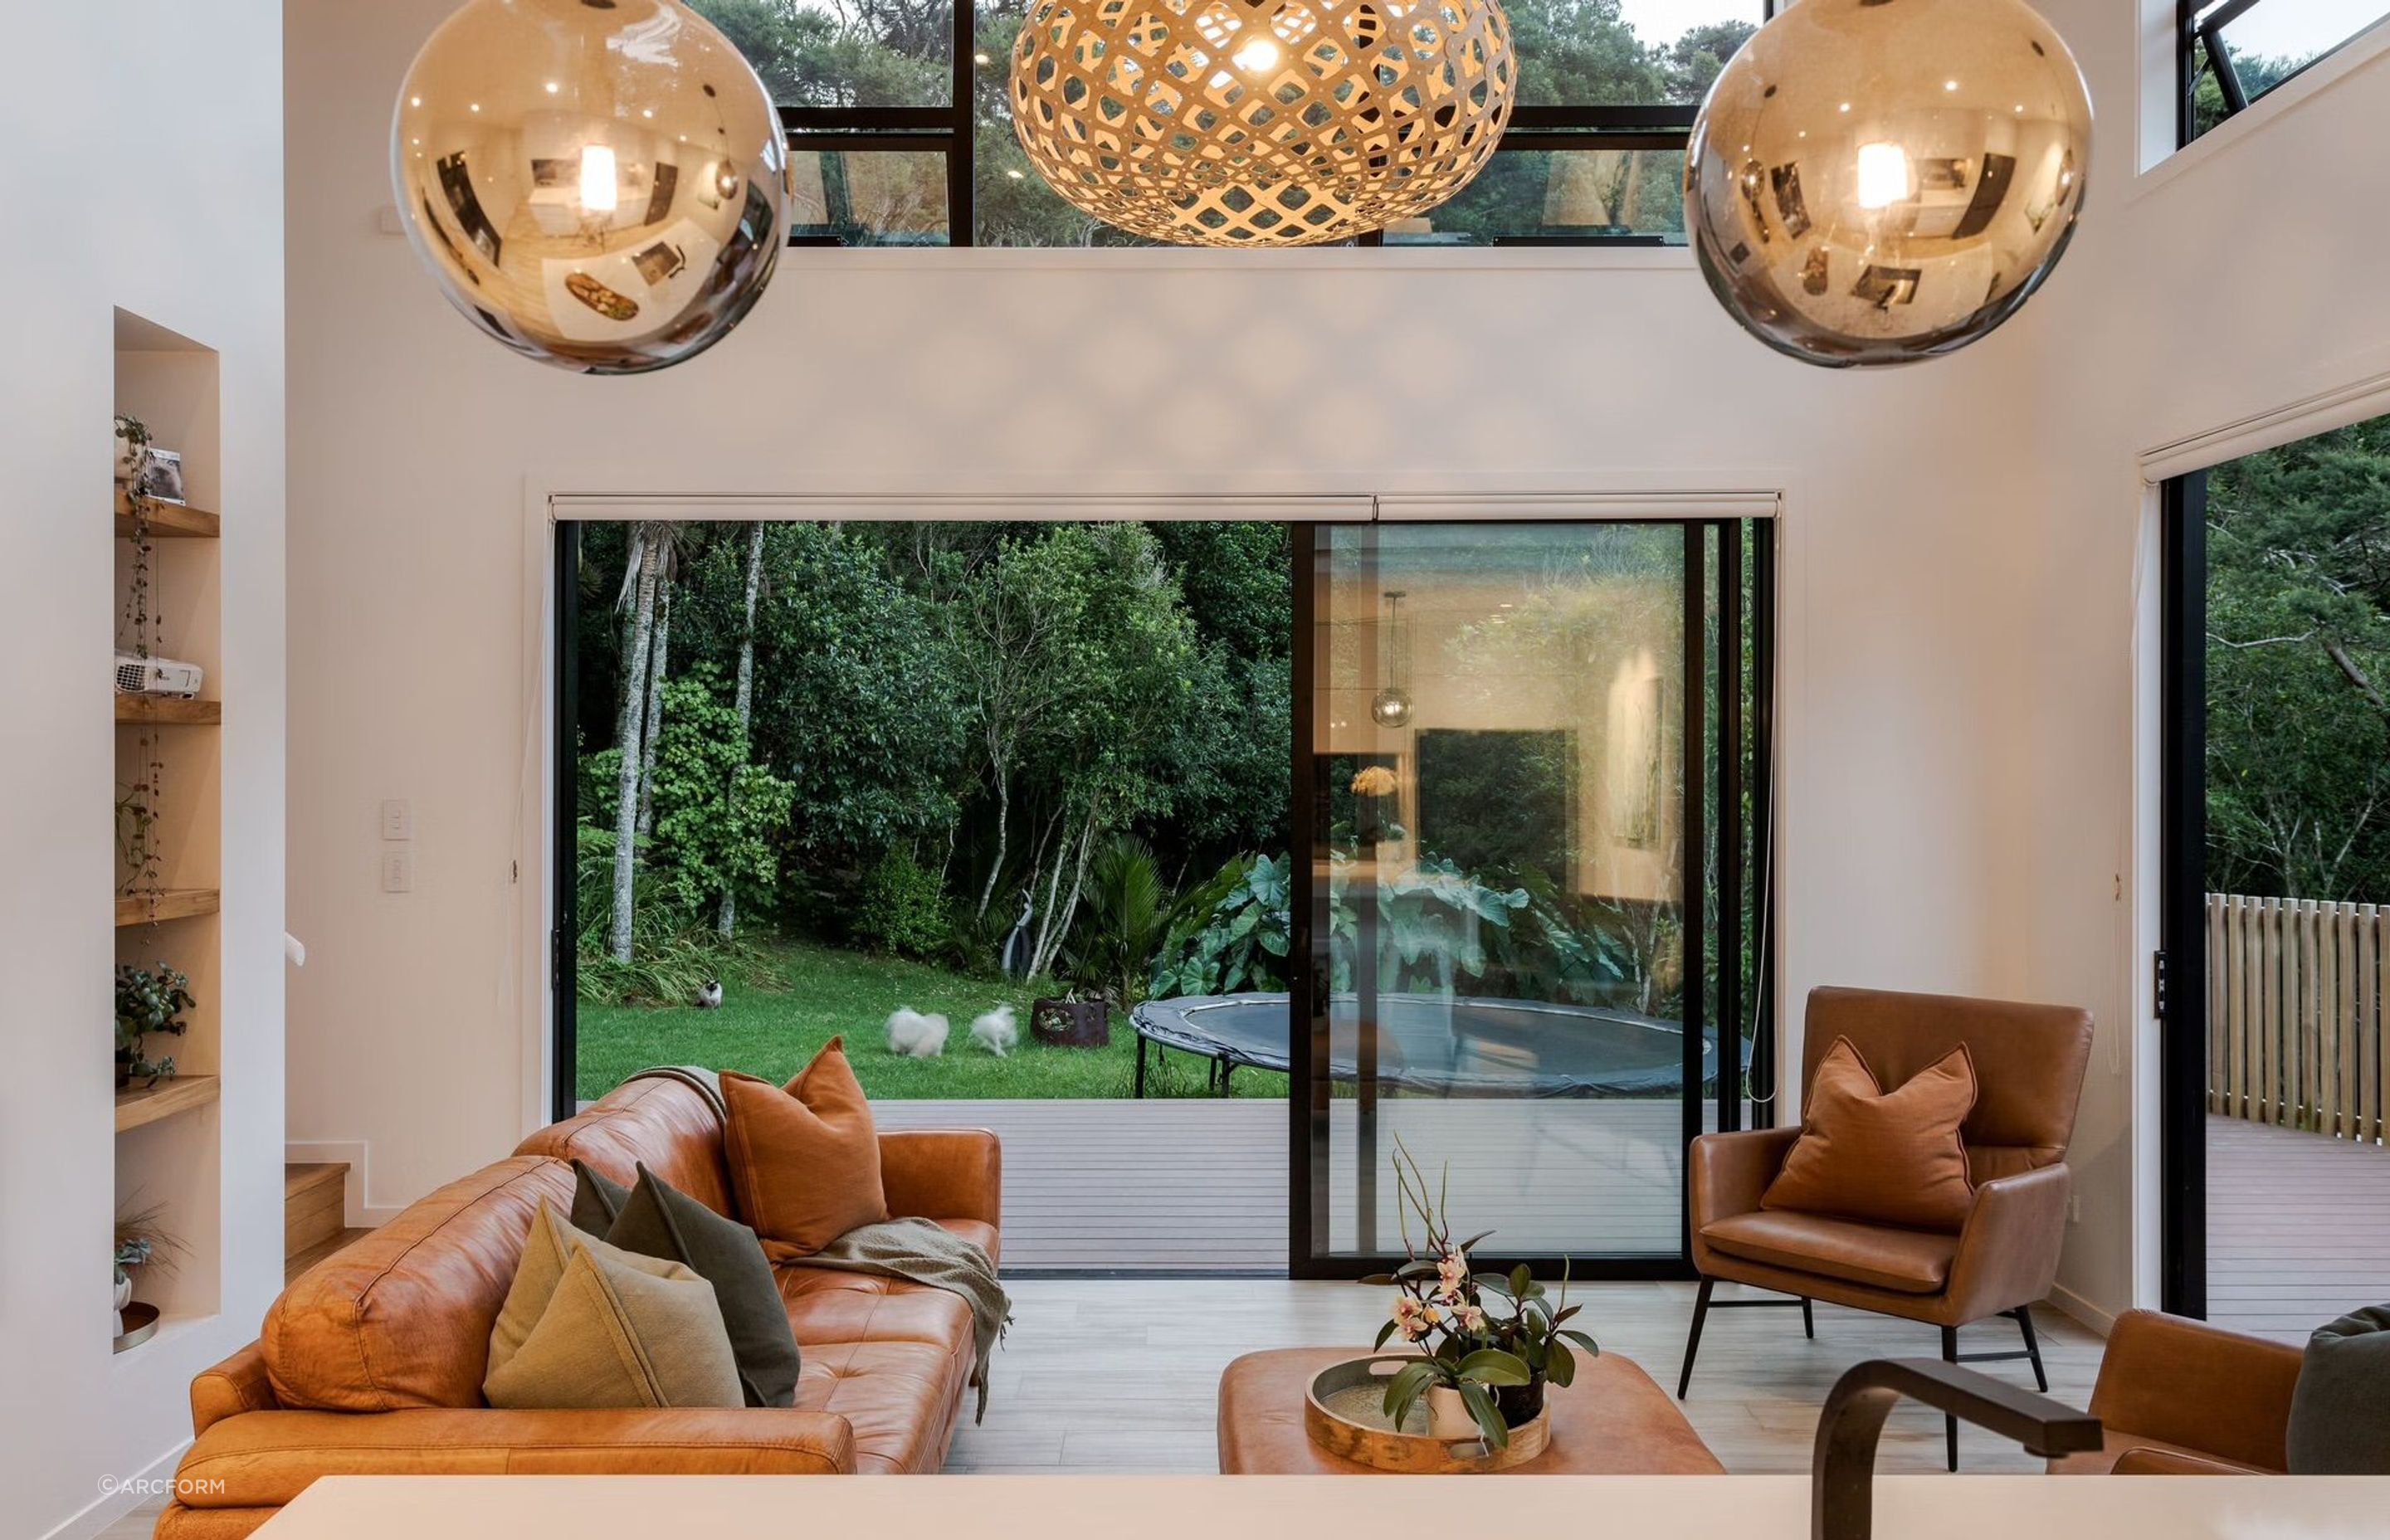 Titirangi House was one of Brendan’s first independent projects after starting his firm Arcform.